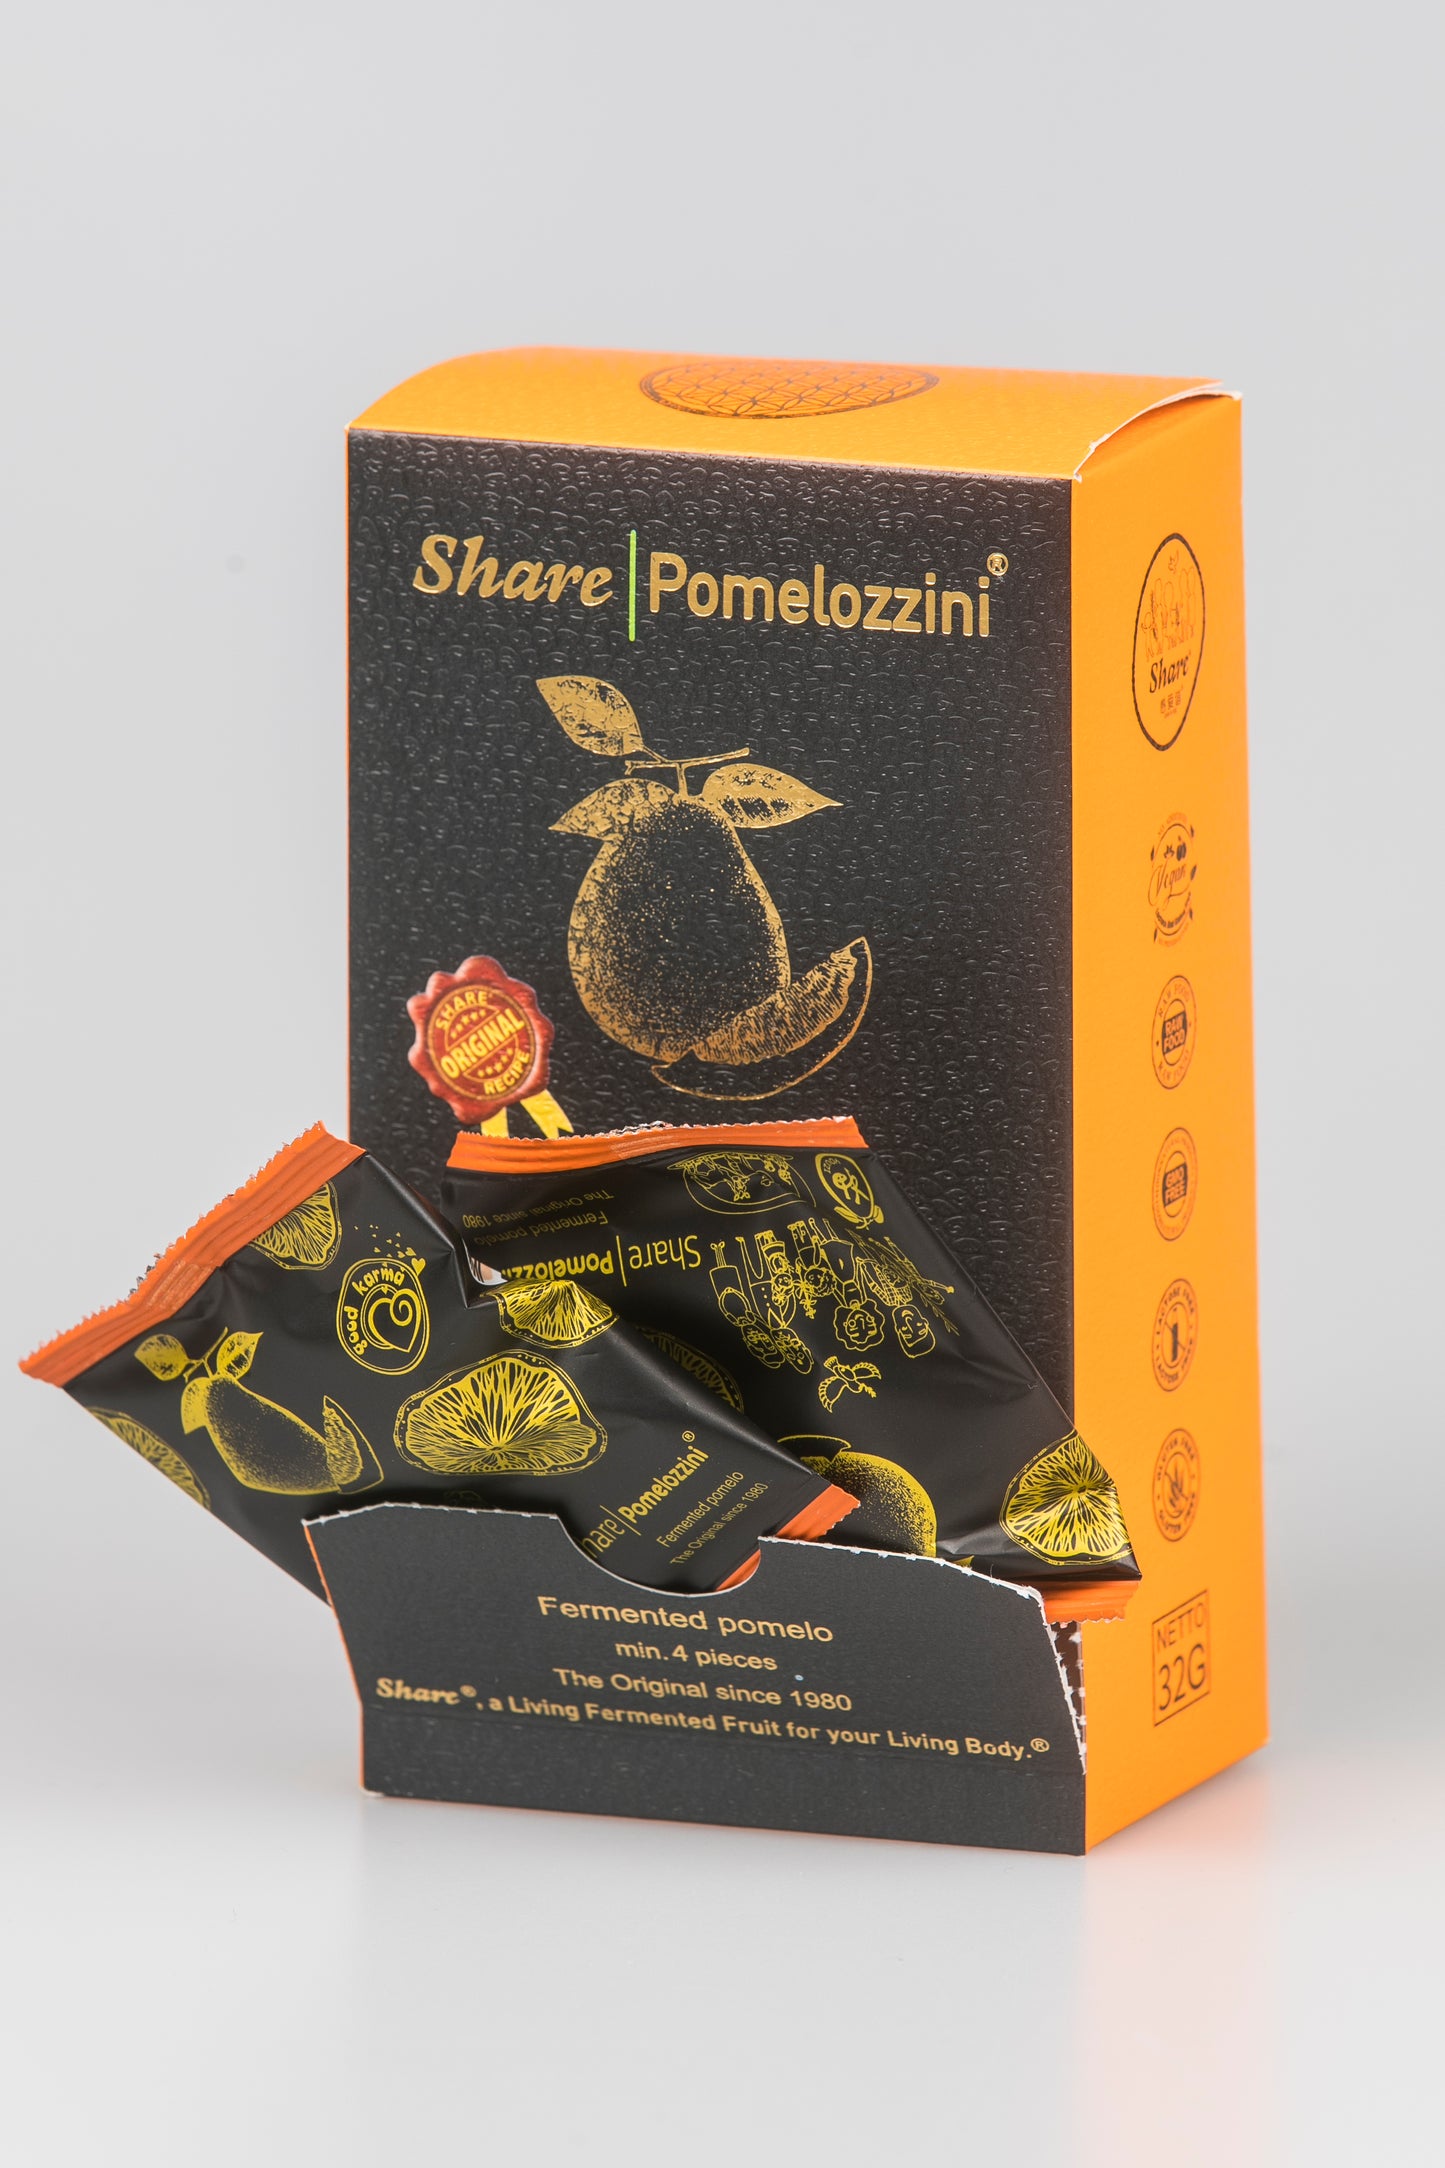 Share Pomelozzini® (110g Starter Box): 30+ month fermented Pomelo (made in Switzerland, free shipping)